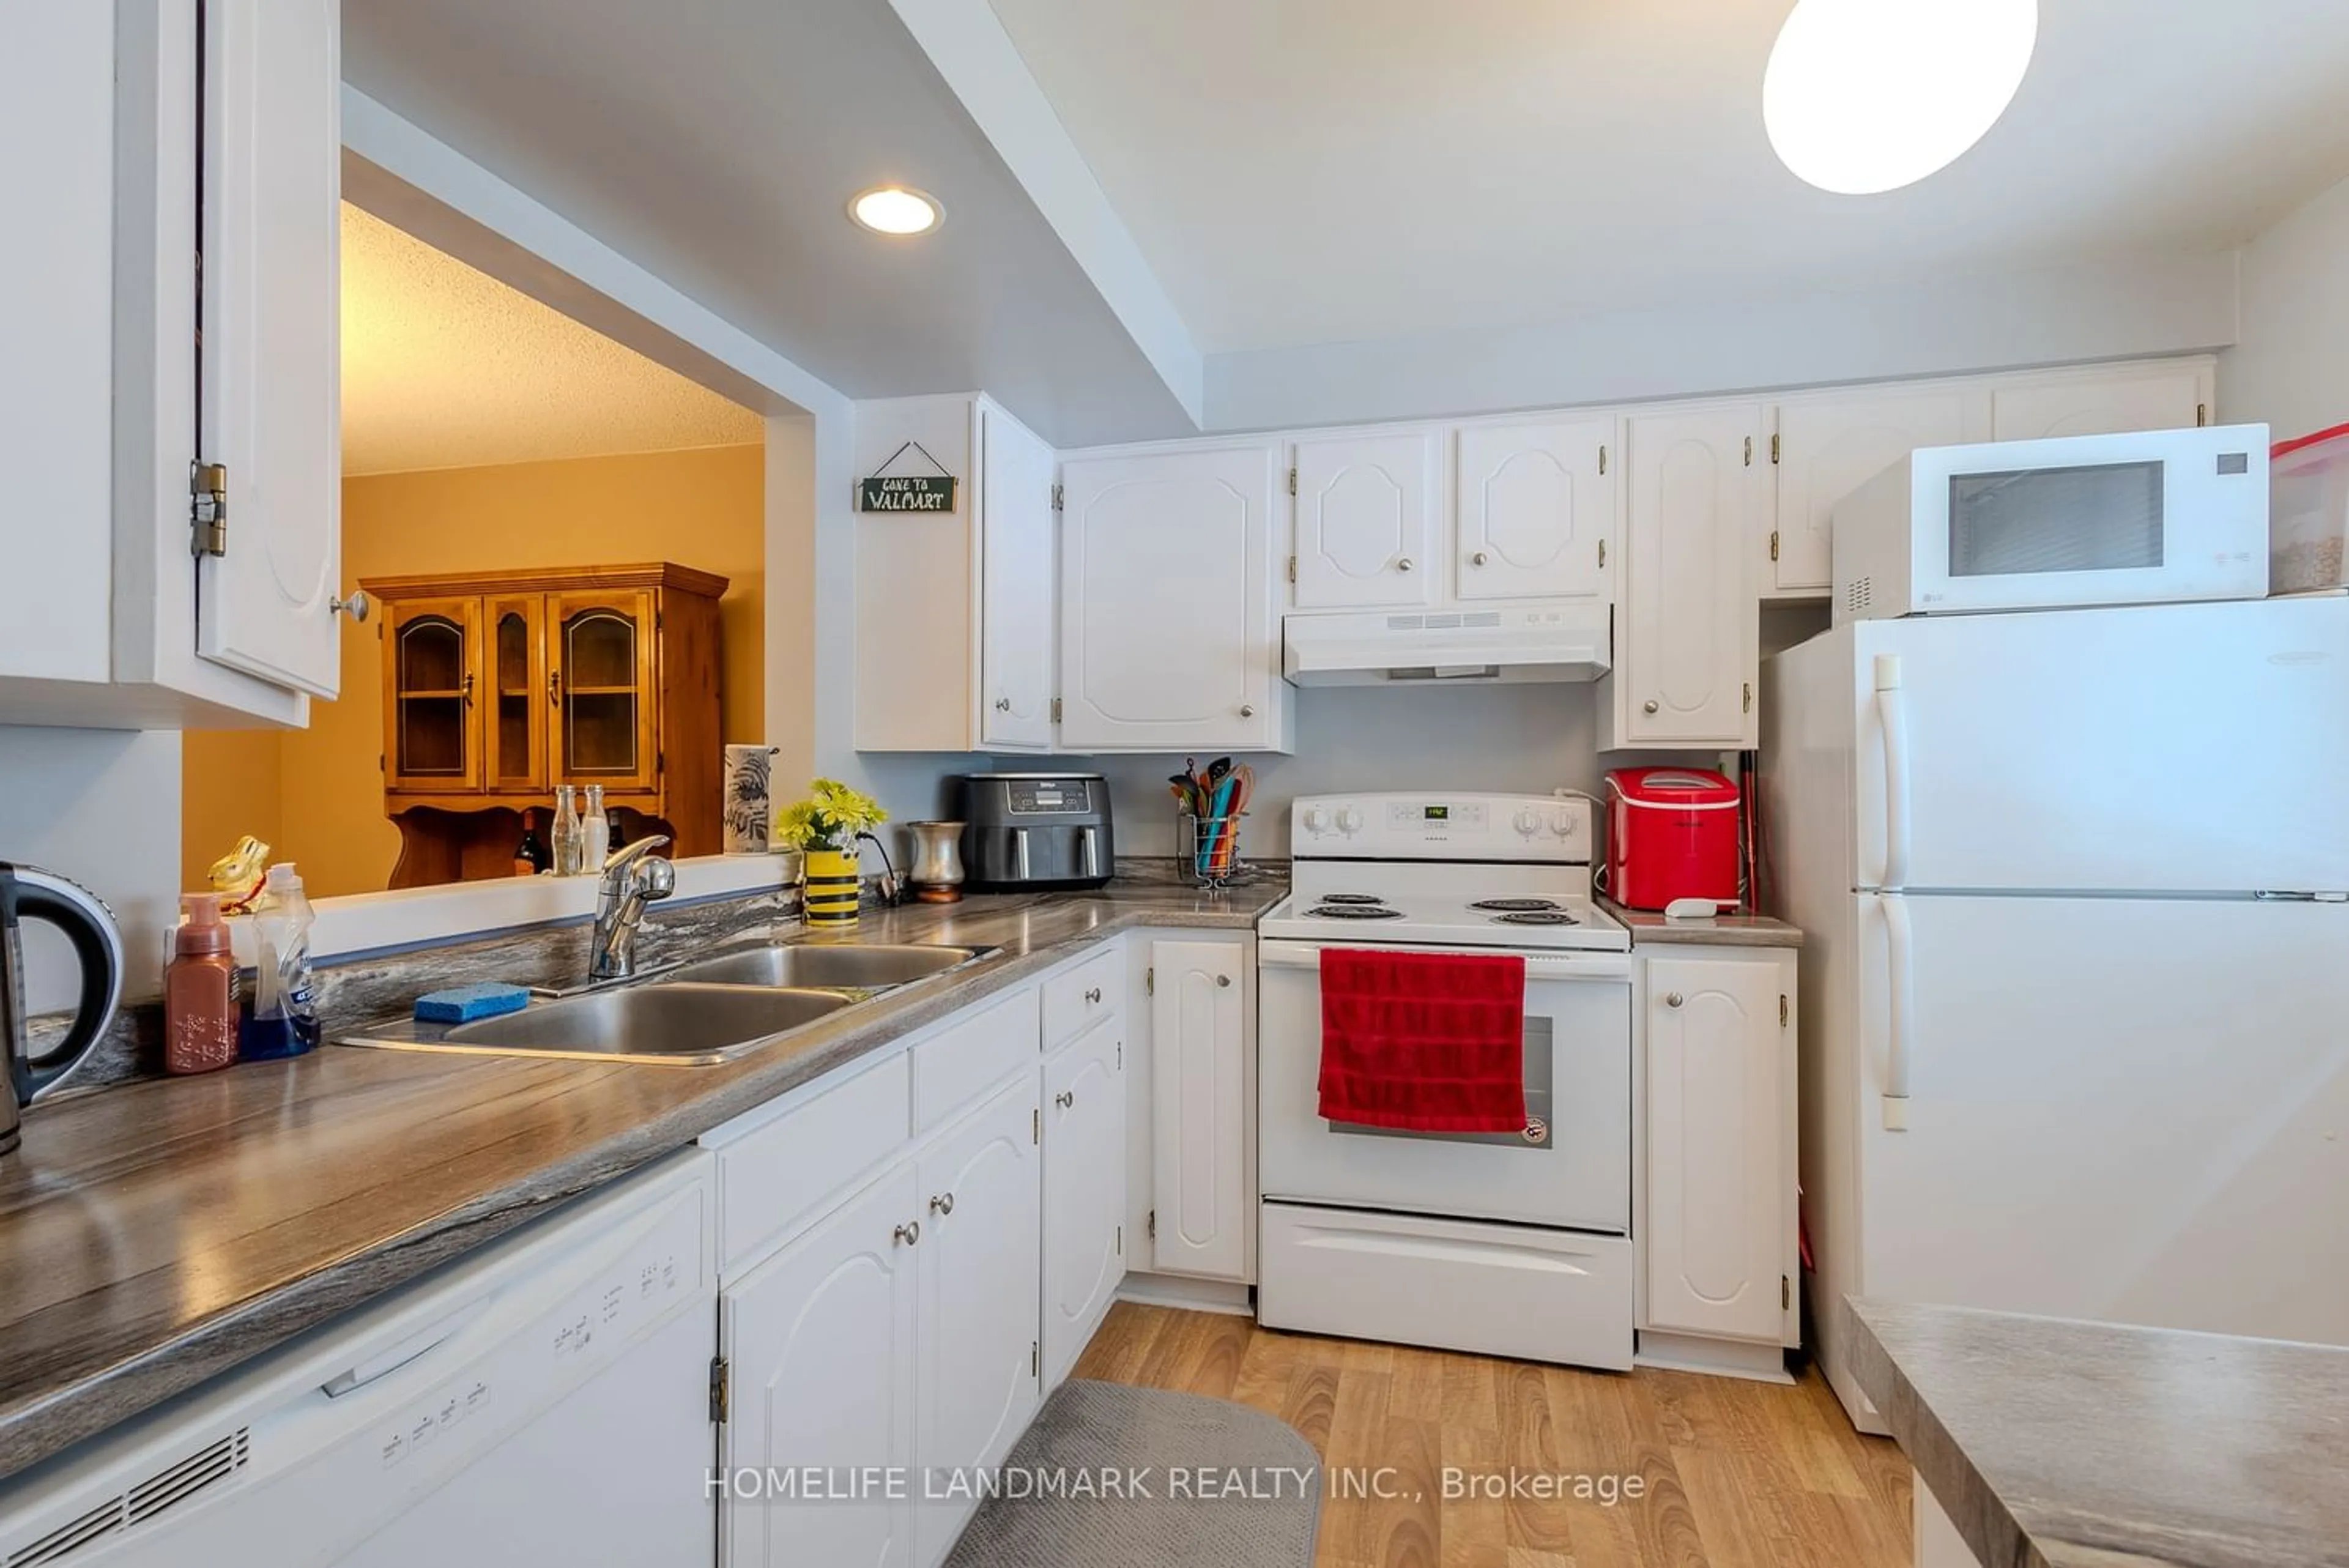 Standard kitchen for 50 Lakeshore Rd #101, St. Catharines Ontario L2N 6P8